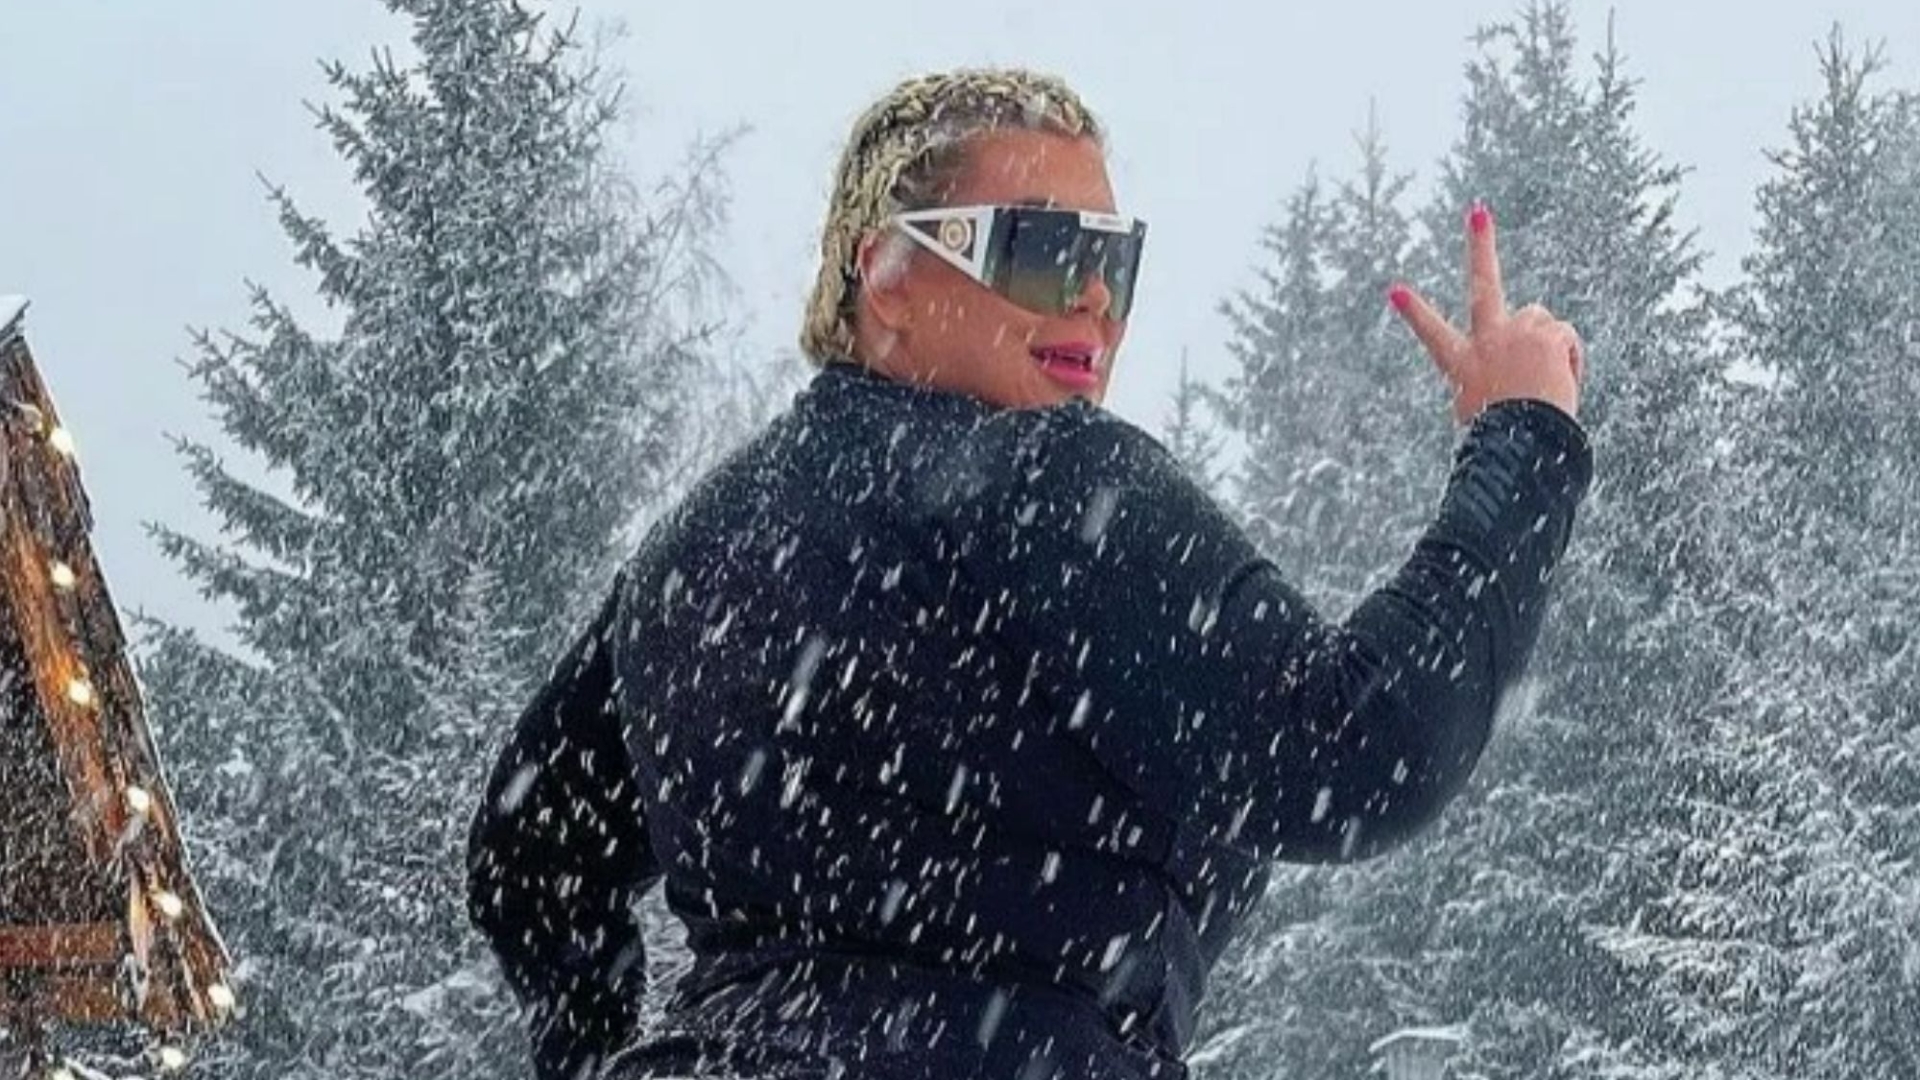 Gemma Collins is slimmer than ever when she takes off her ski jumpsuit for a skiing holiday